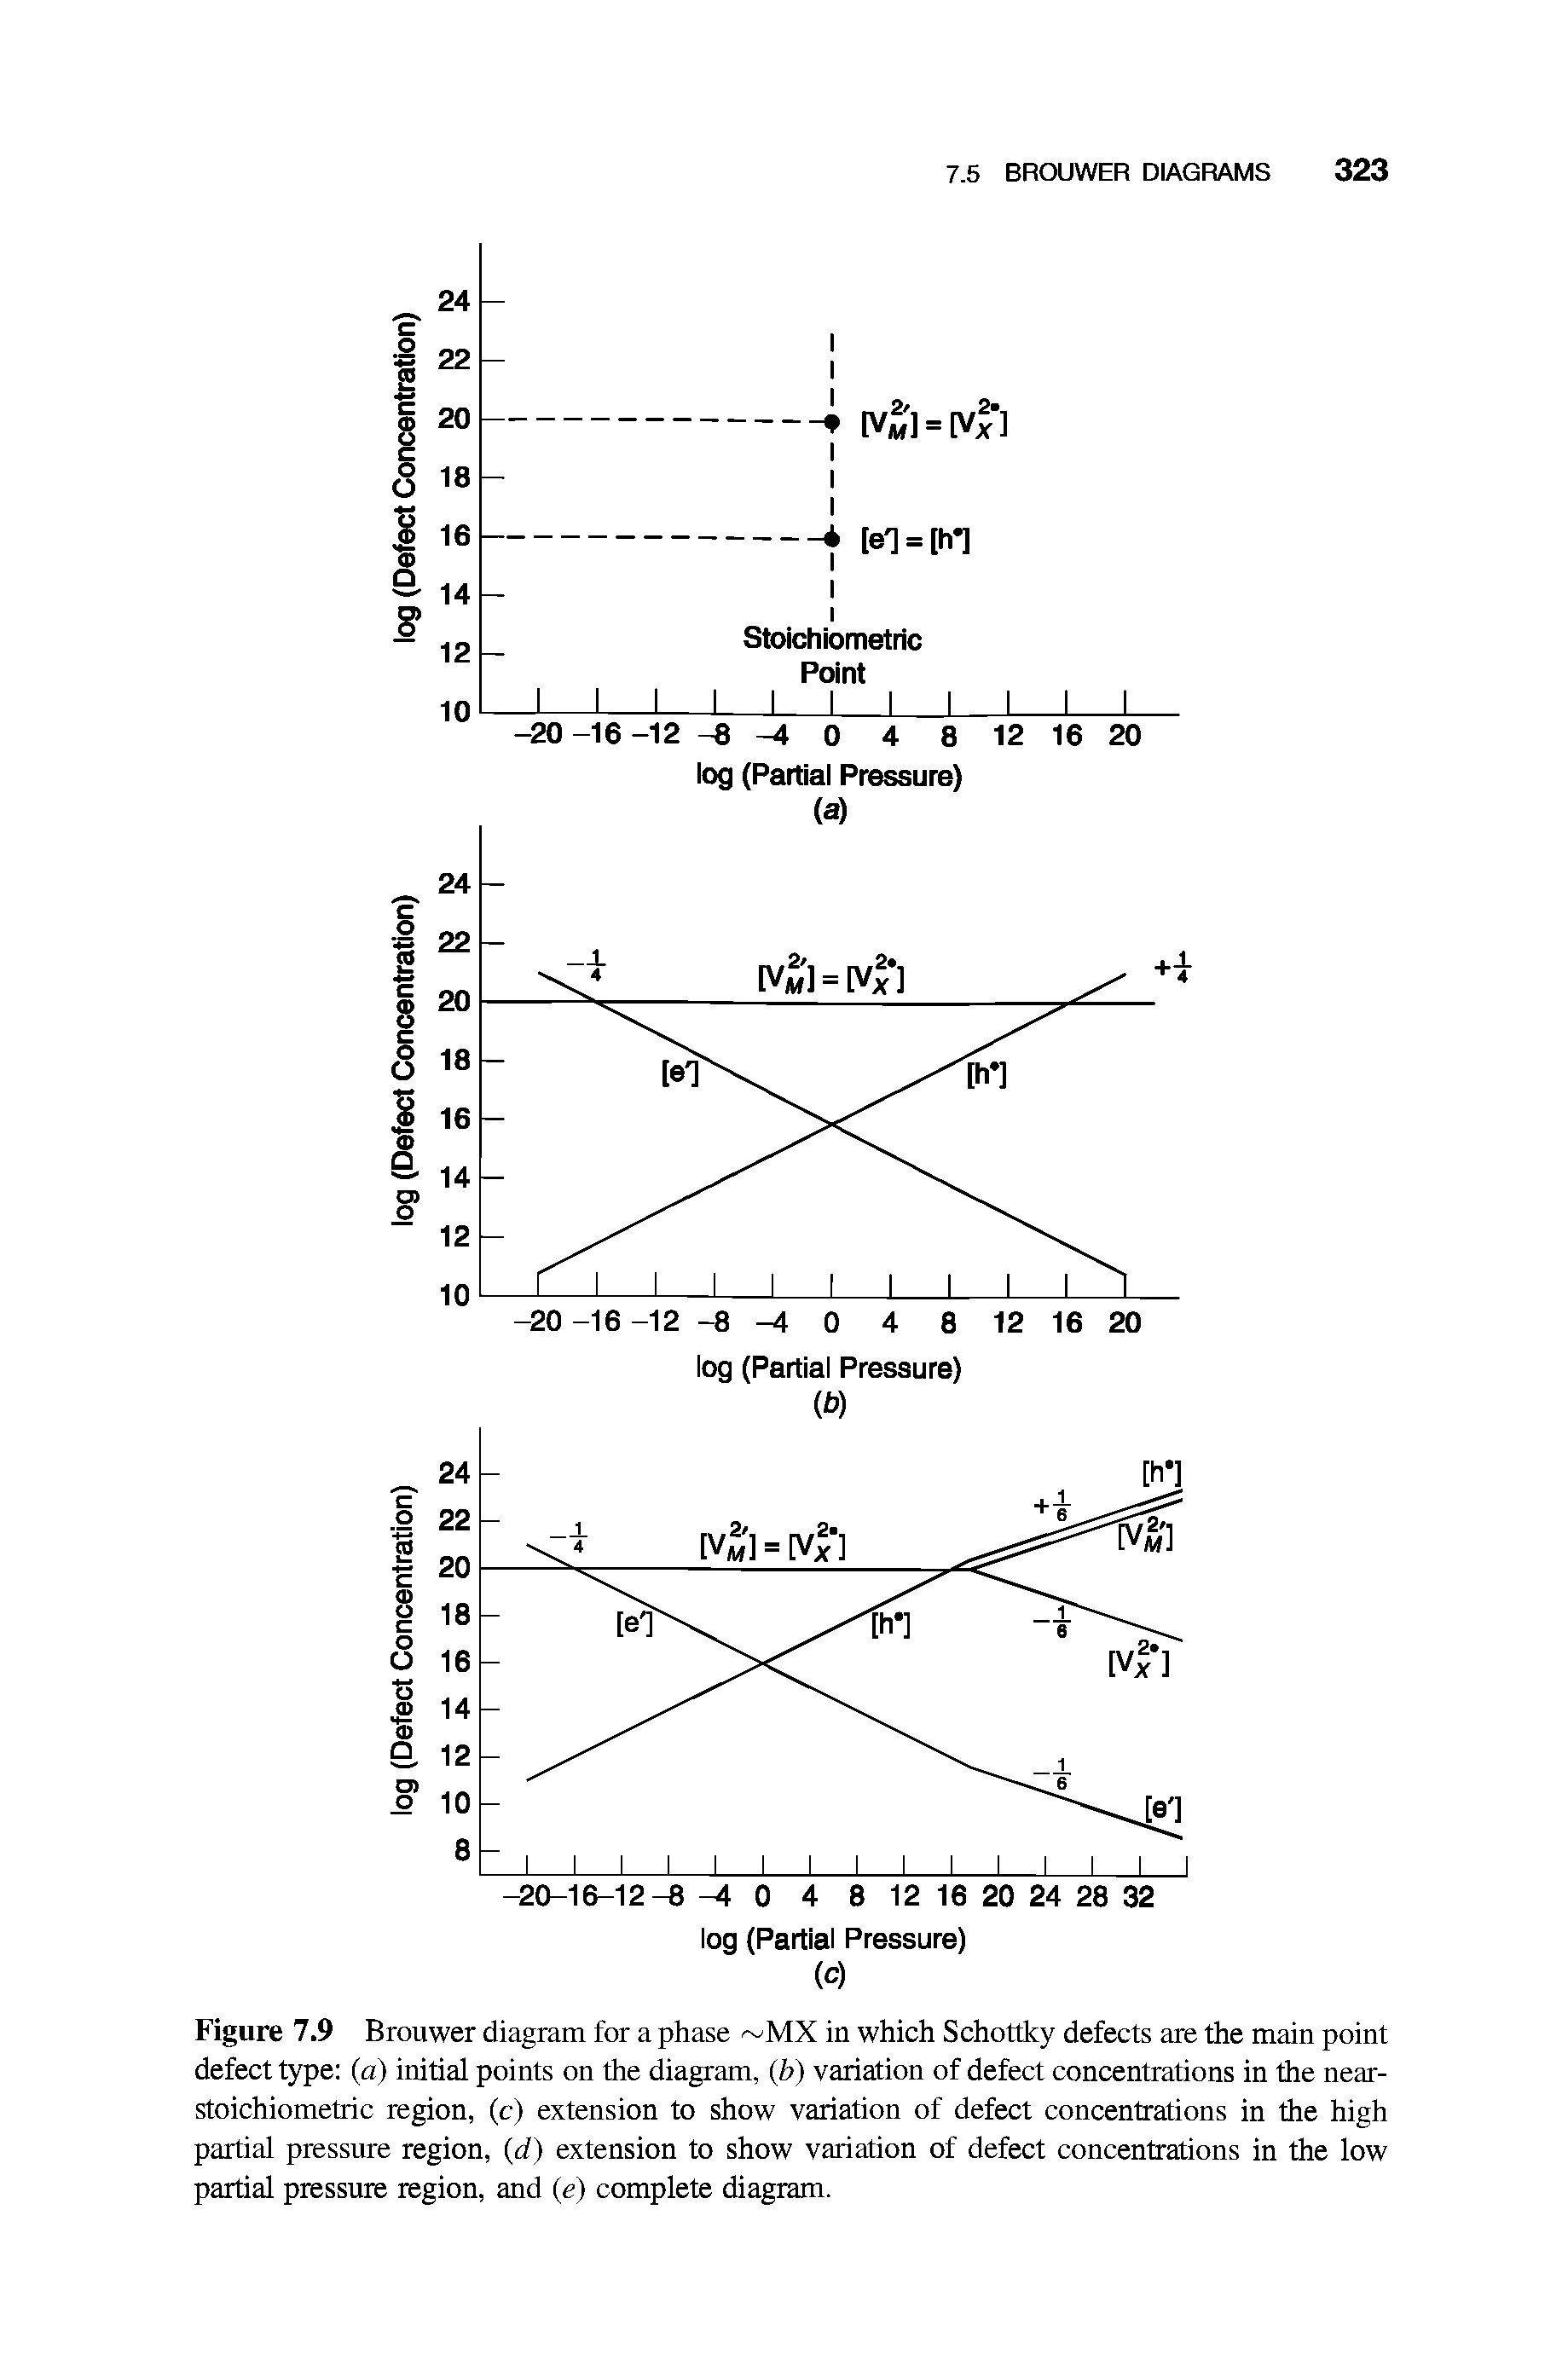 Figure 7.9 Brouwer diagram for a phase MX in which Schottky defects are the main point defect type (a) initial points on the diagram, (b) variation of defect concentrations in the near-stoichiometric region, (c) extension to show variation of defect concentrations in the high partial pressure region, (d) extension to show variation of defect concentrations in the low partial pressure region, and (e) complete diagram.